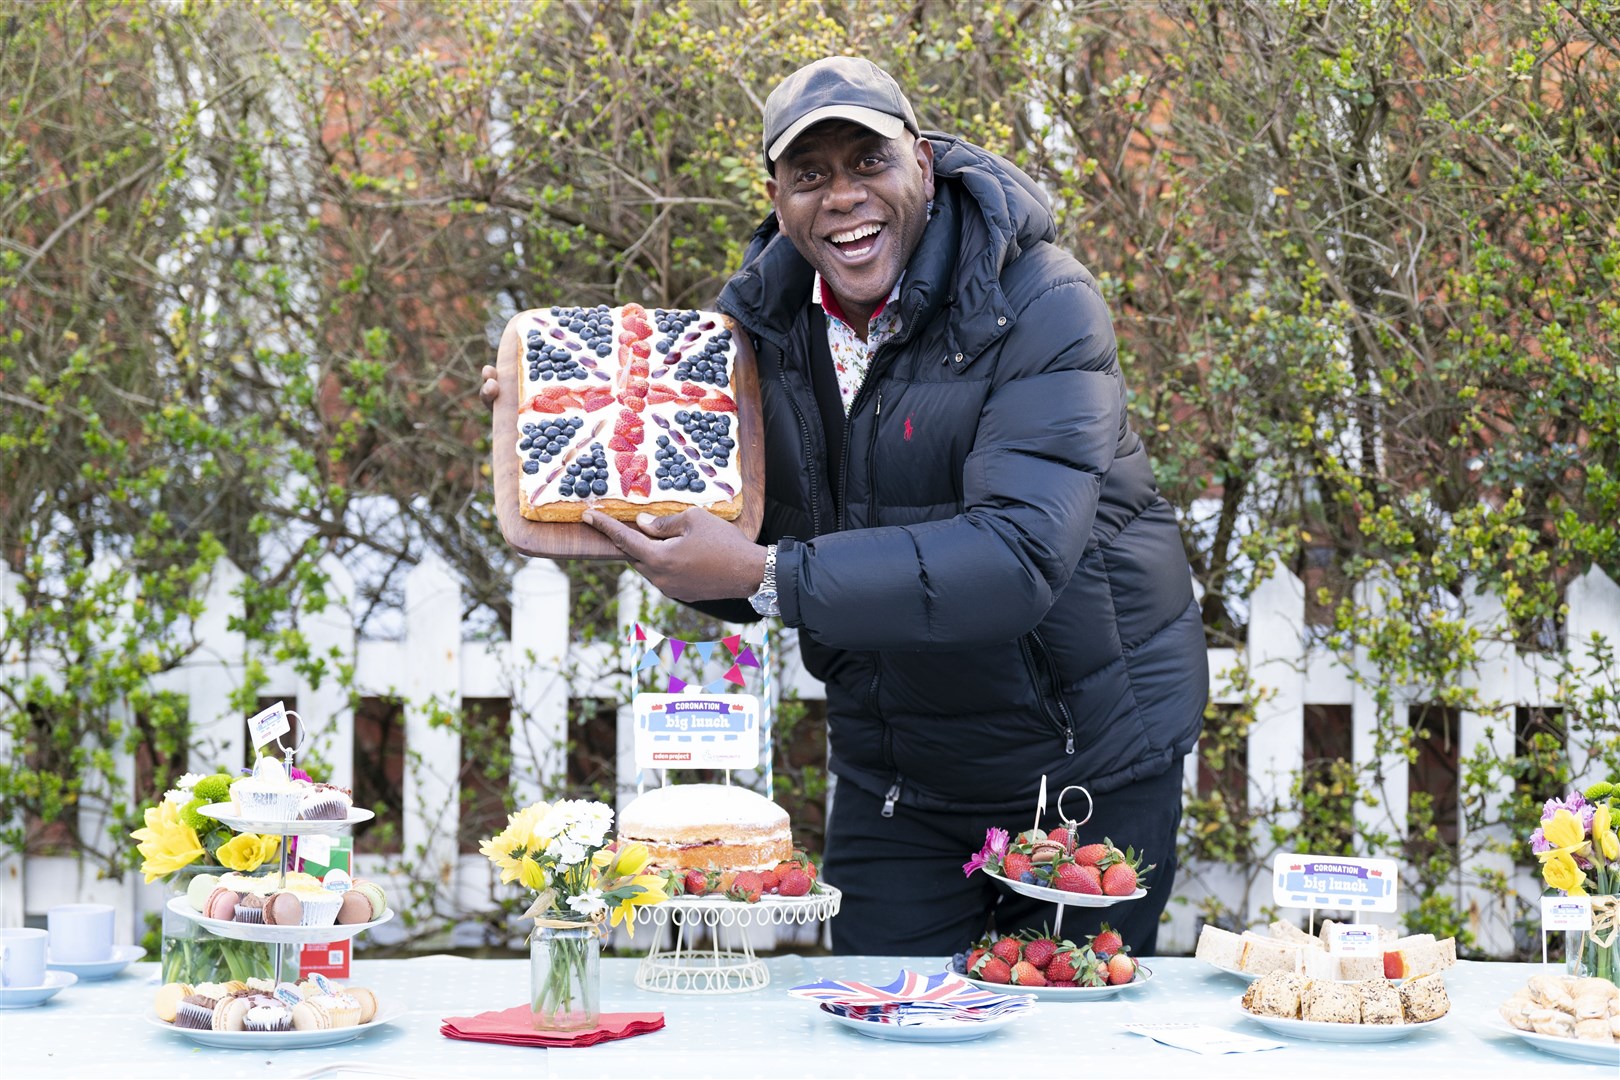 Celebrity TV chef Ainsley Harriott joins Coronation Big Lunch organisers in East Sheen, south-west London (Kirsty O’Connor/PA)